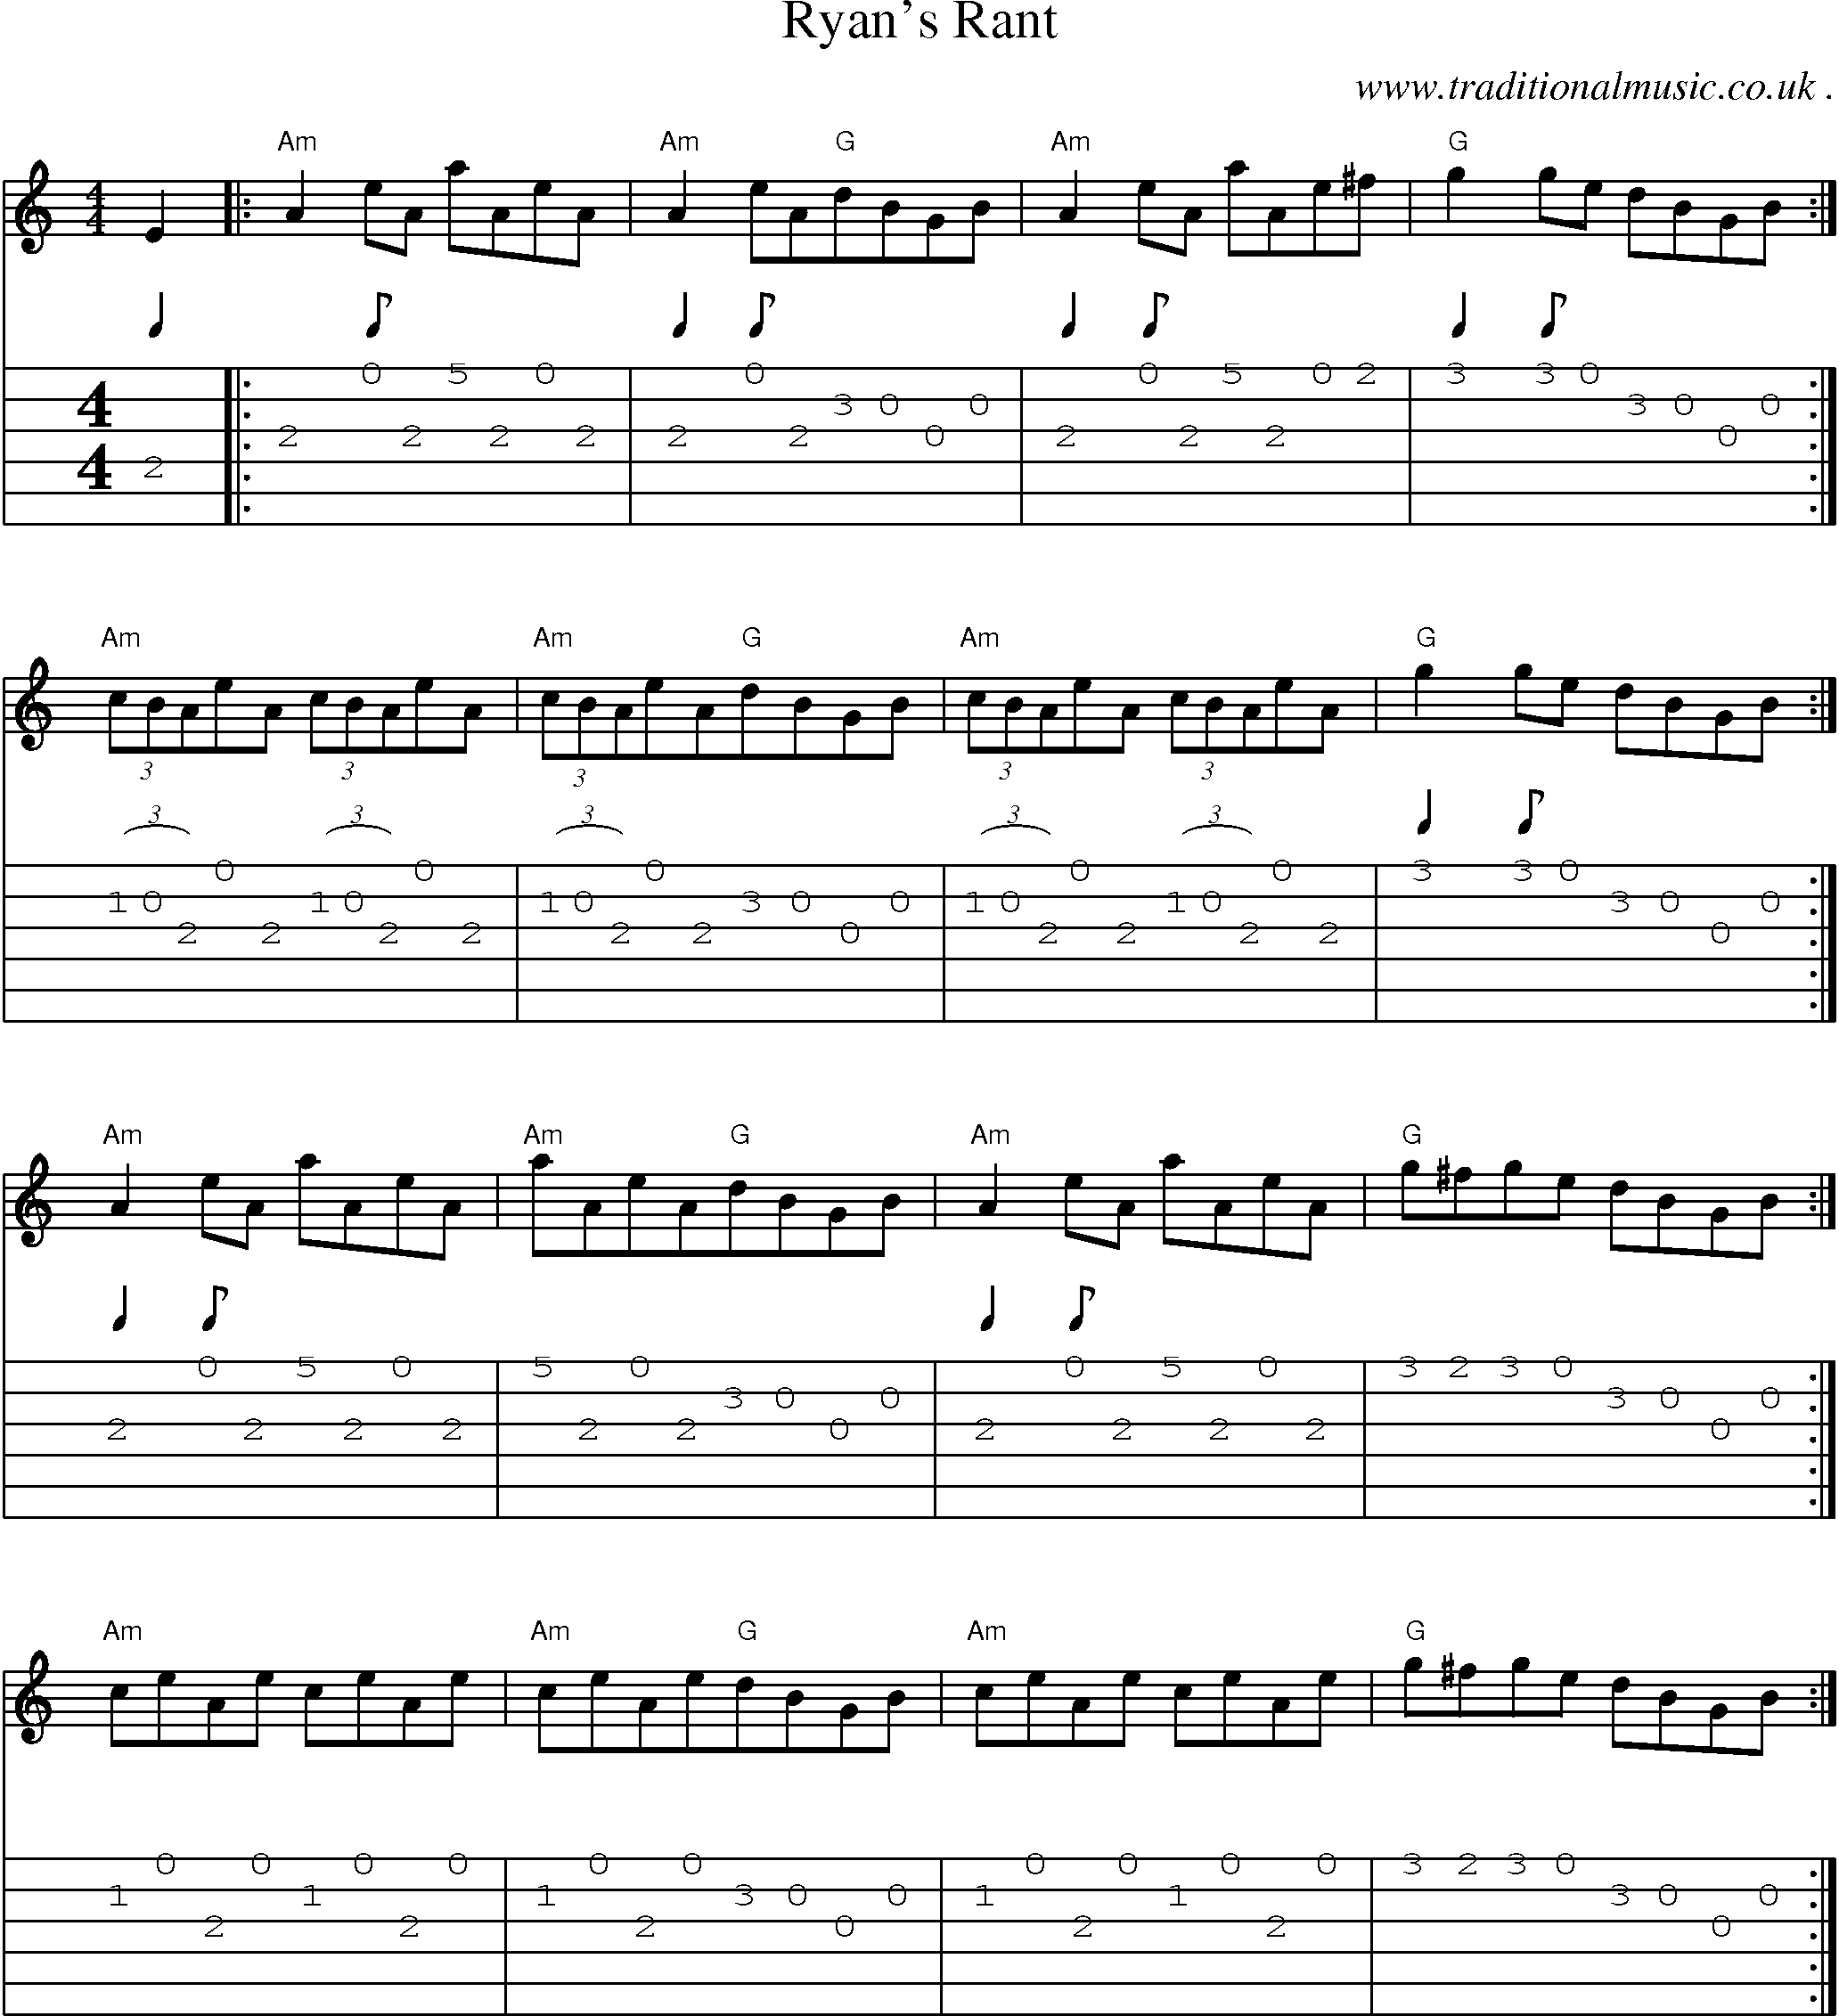 Sheet-Music and Guitar Tabs for Ryans Rant